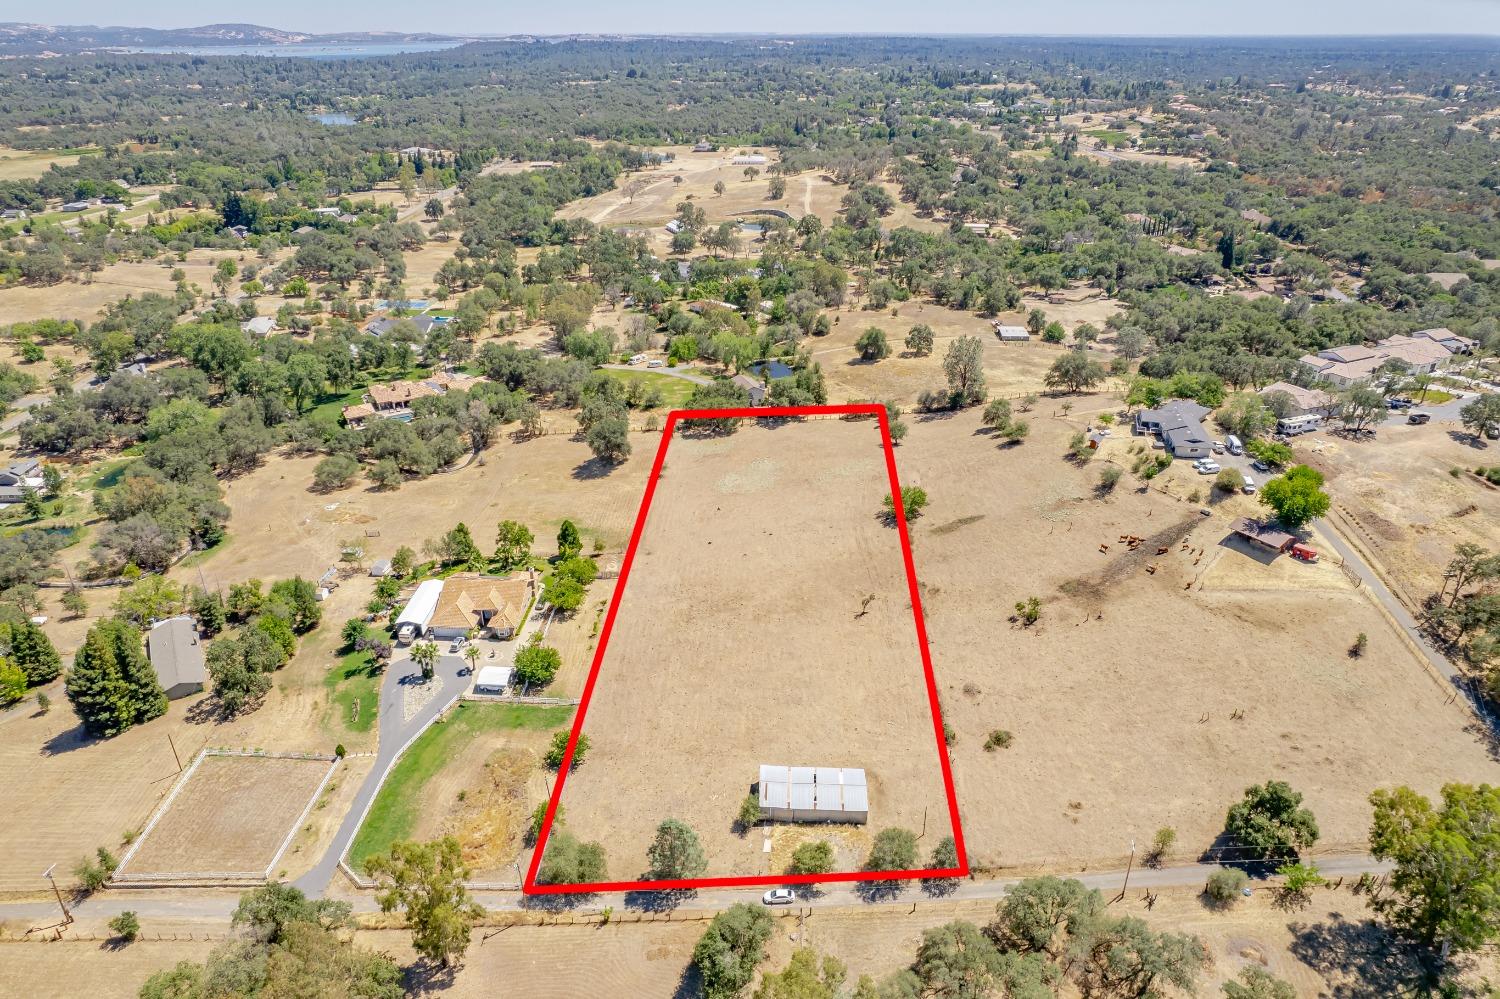 Rare opportunity to acquire a private estate size lot to build your dream home. This parcel is located at the end of a quiet Cul-De-Sac in the Heart of Loomis. This approximate 3.2 acre lot features a building pad, and Beautiful Local Views Country living at it's finest yet minutes from Highway 80,5 min to Starbucks, grocery, dining, entertainment & 1 hr to skiing!